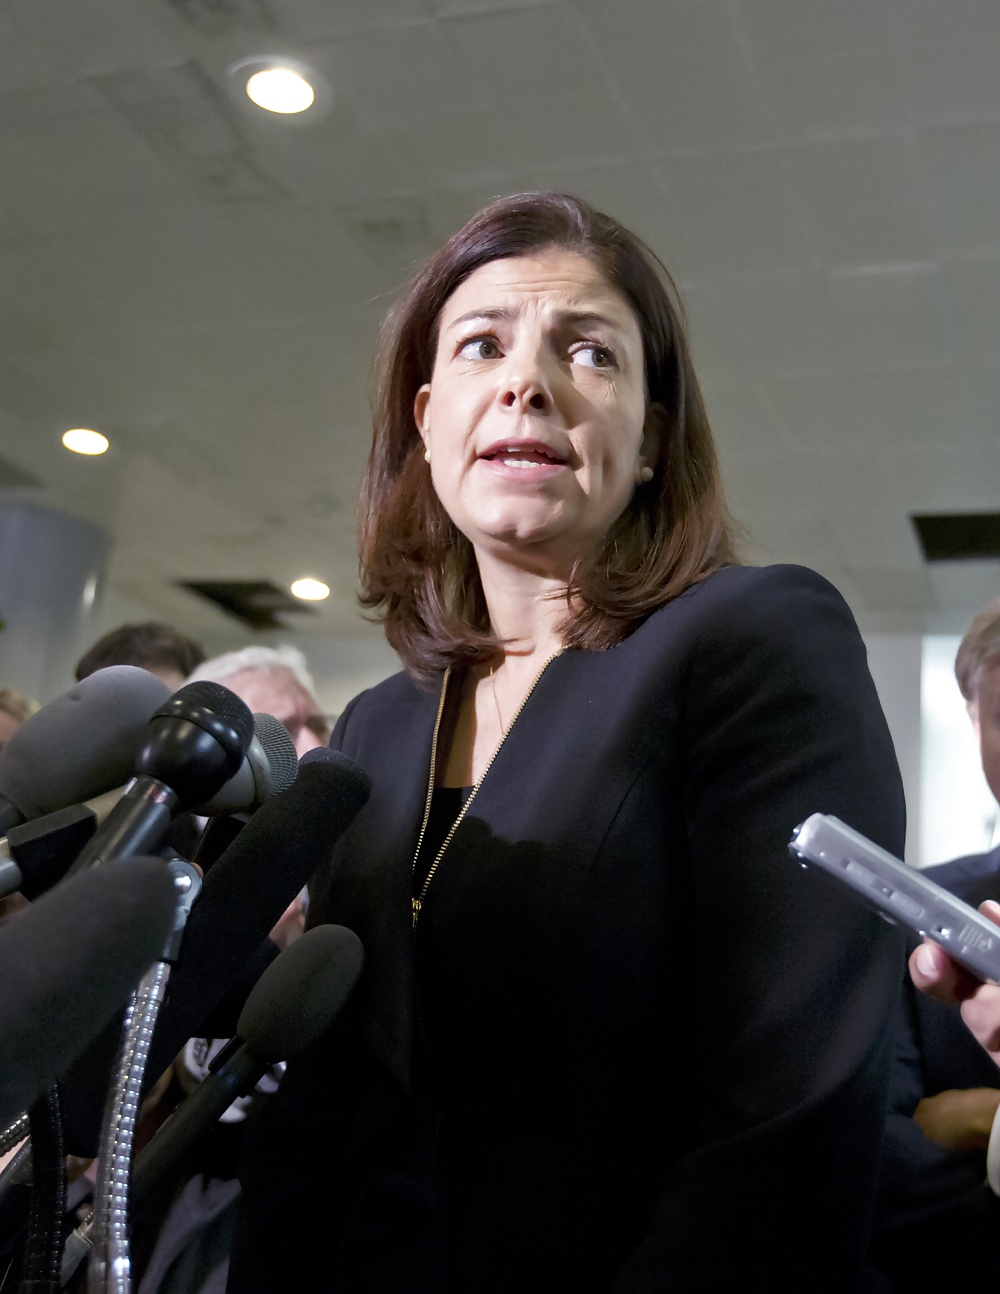 It's so good jerking off to conservative Kelly Ayotte #35039679